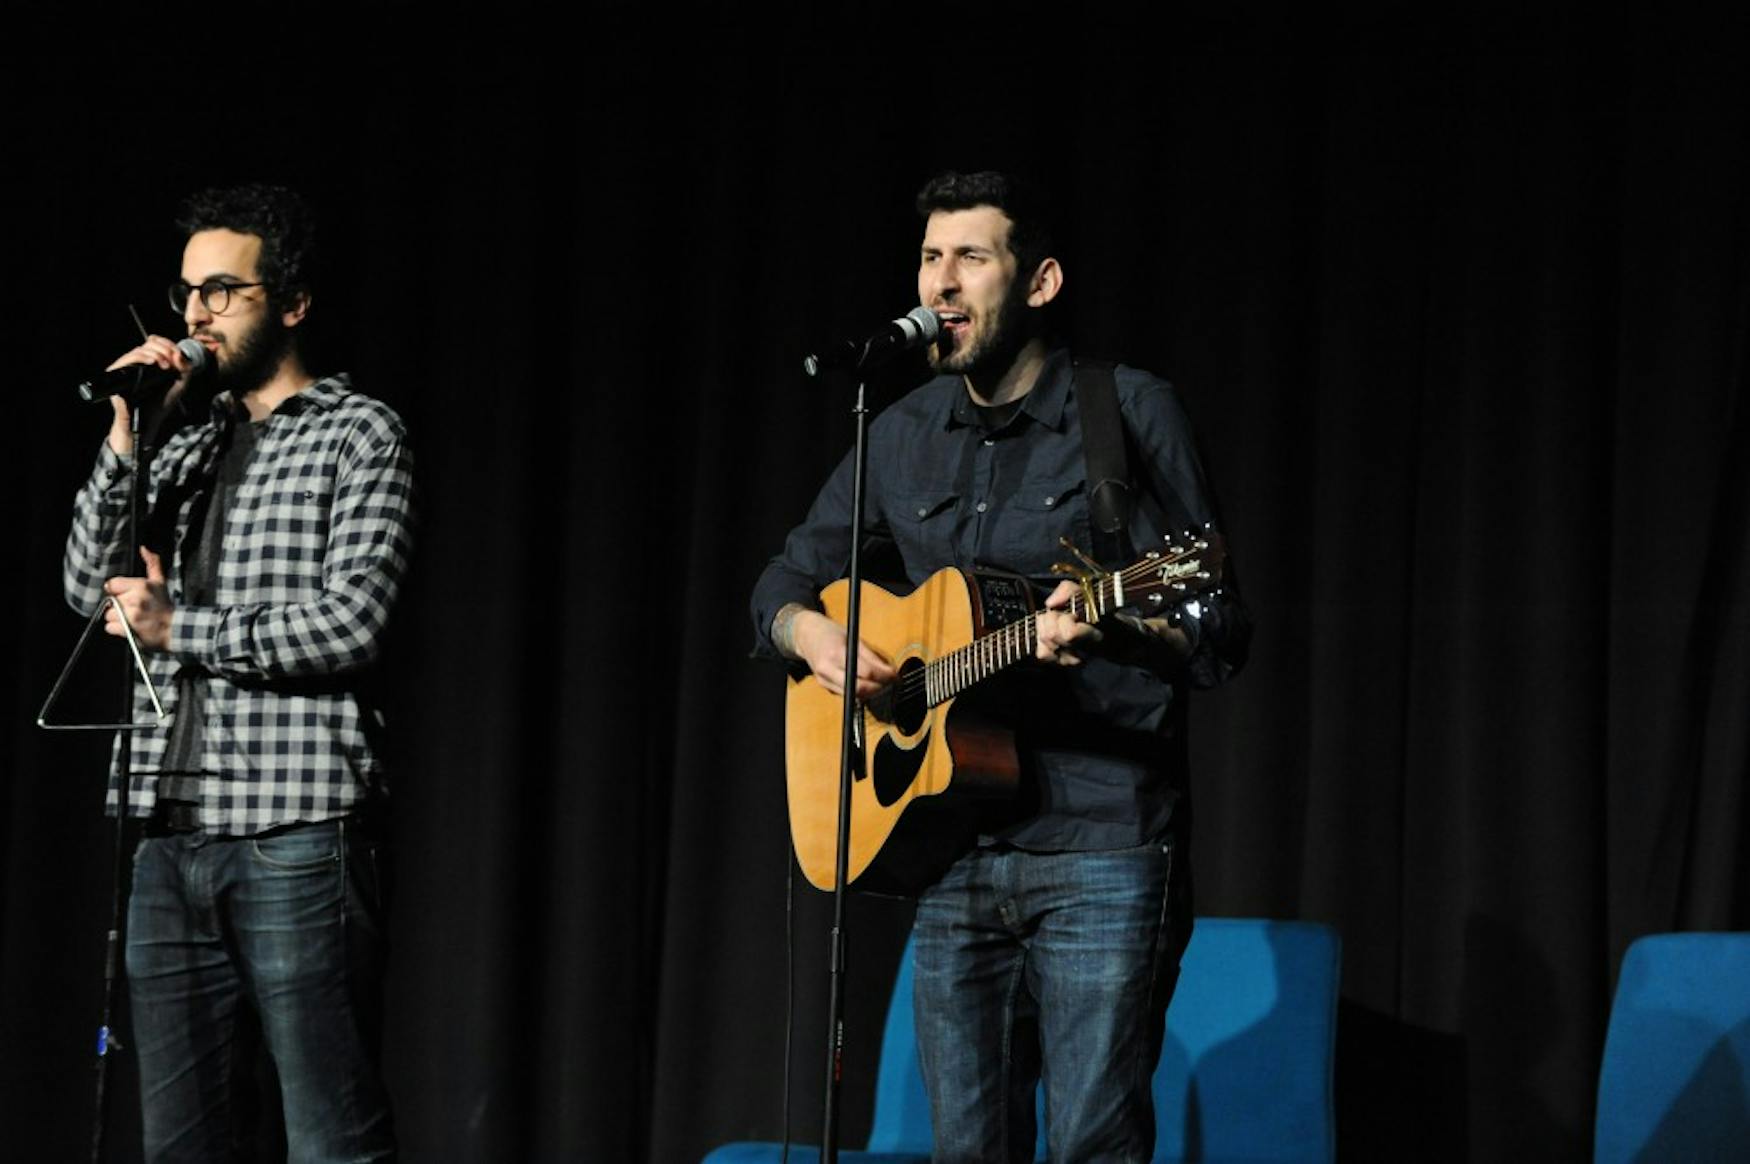 SING ME A SONG: In addition to stand-up comedy and skits, Dave (left) and Ethan also performed original comedic songs that gave dating advice and anecdotes.